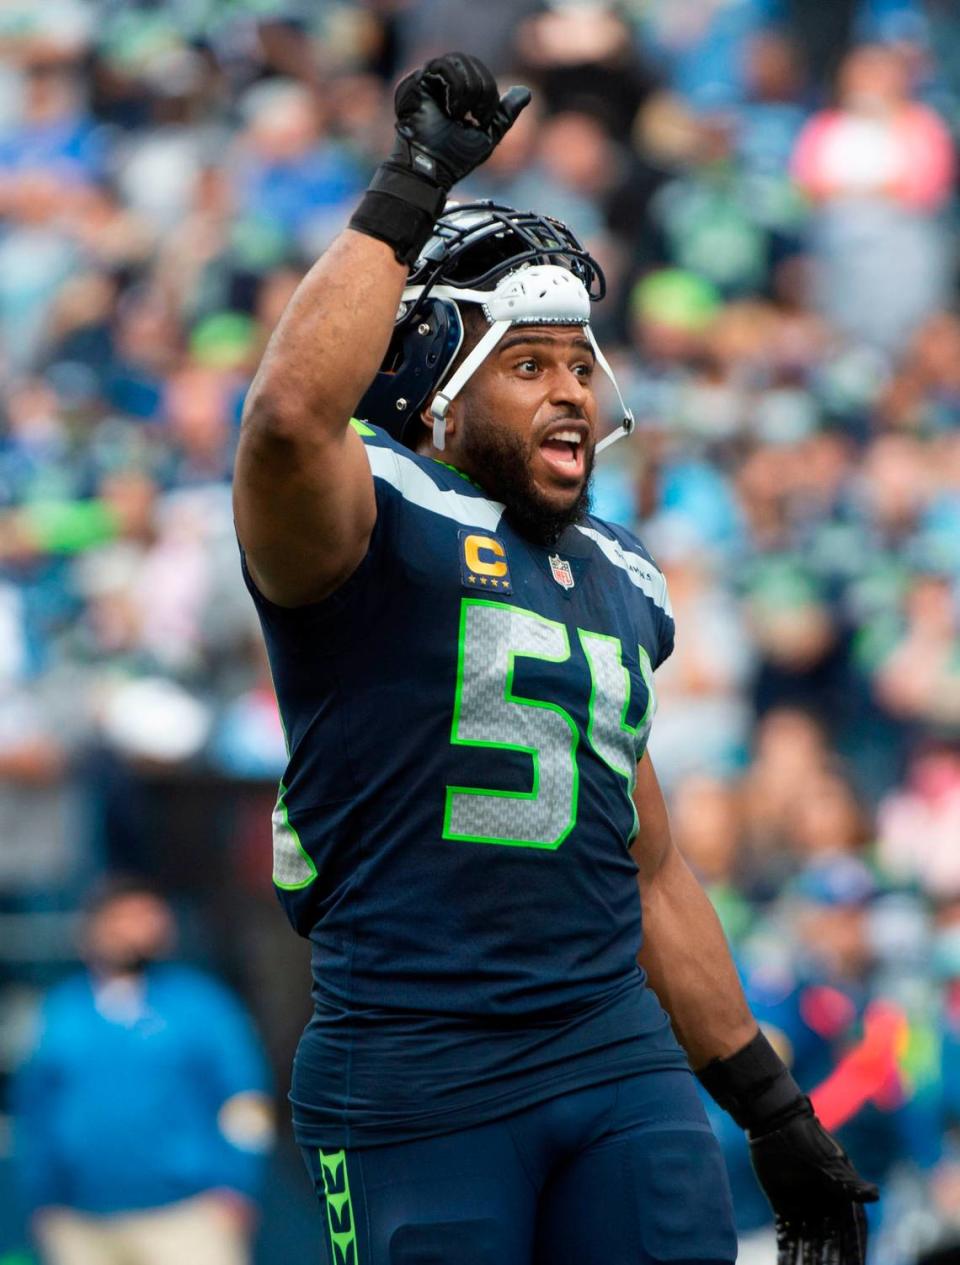 Bobby Wagner hollers at the fans after a touchdown pass to Julio Jones was overturned for stepping out of bounds. The Seattle Seahawks played the Tennessee Titans in an NFL football game at Lumen Field in Seattle, Wash., on Sunday, Sept. 19, 2021.